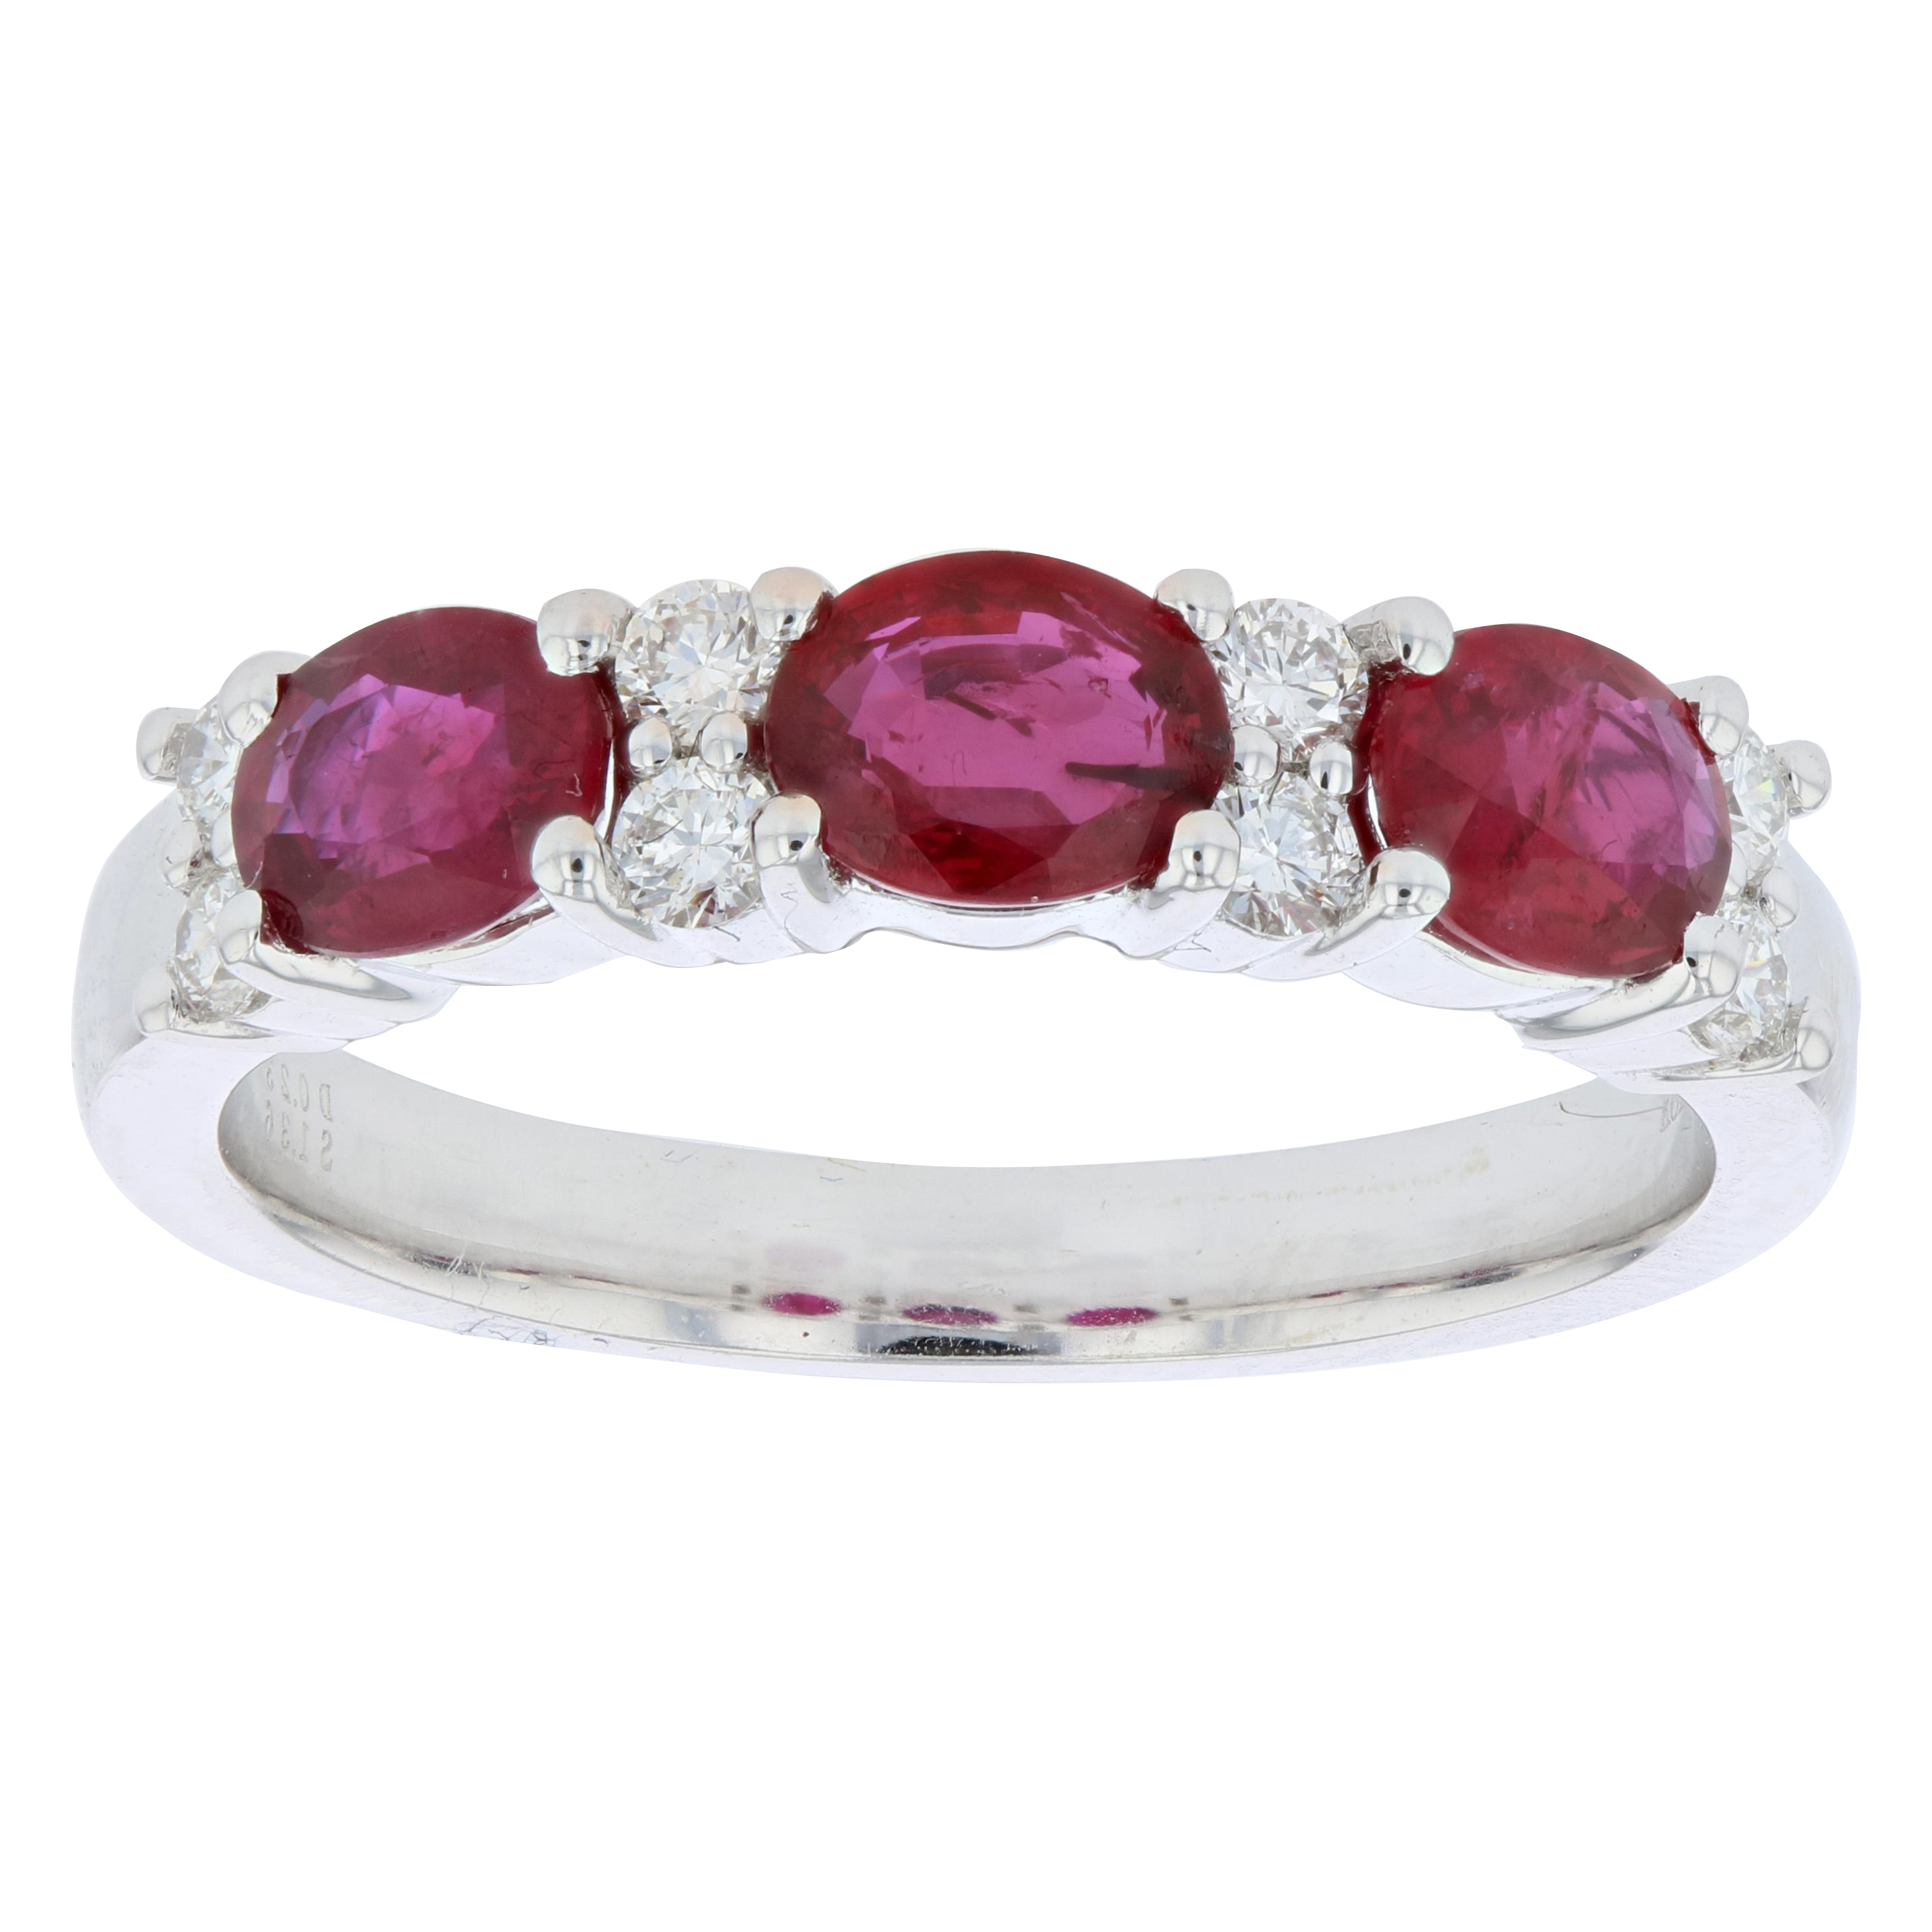 View 1.59ctw Diamond and Ruby Band in 18k White Gold